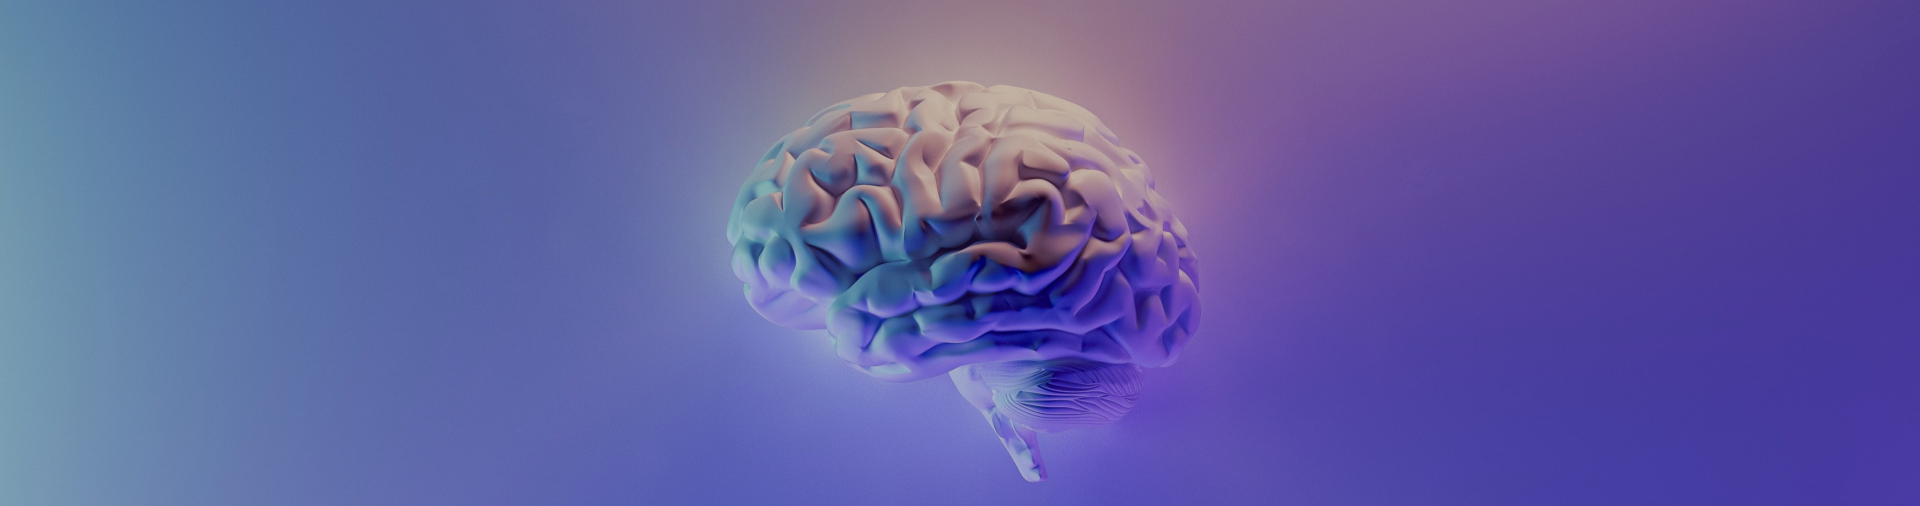 A photo of a brain in blue, purple, and golden light colors